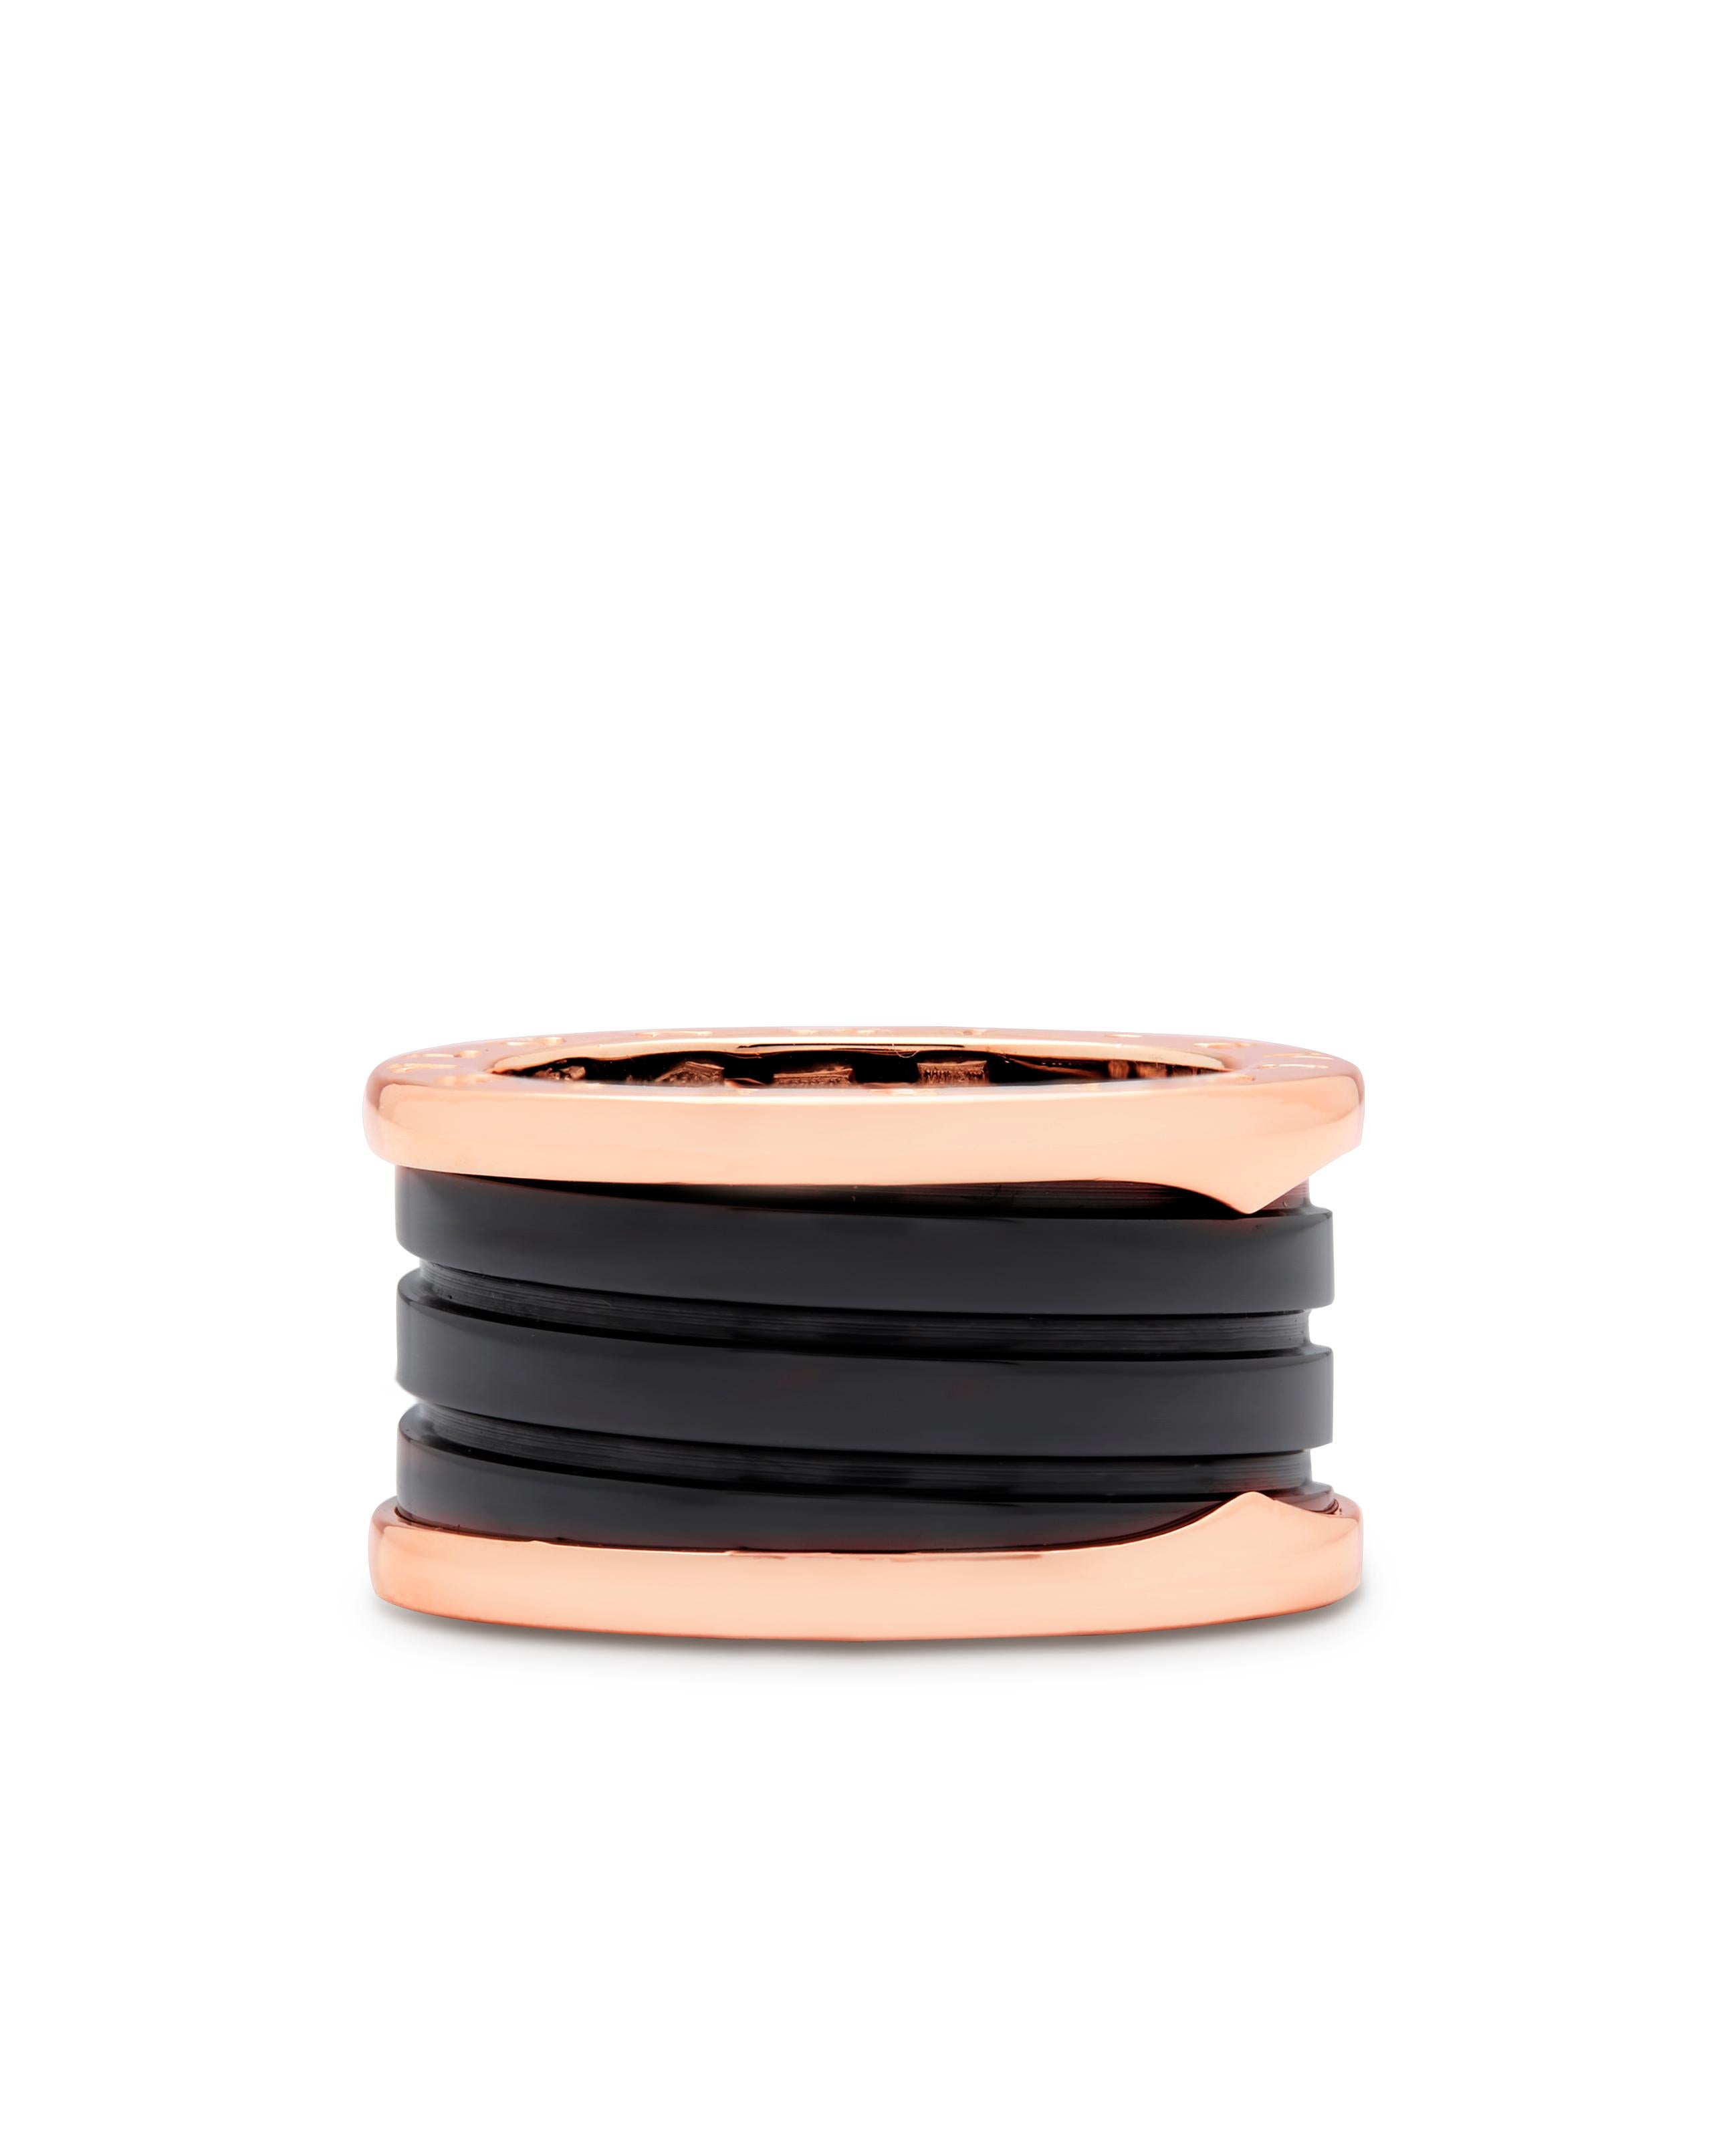 Bulgari large ring B-Zero collection, rose gold with black ceramic 

Bulgarian ring draws its inspiration from the most renowned amphitheater of the world, the Colosseum, the B.zero1 ring is a true statement of Bulgari’s creative vision, 

Signed